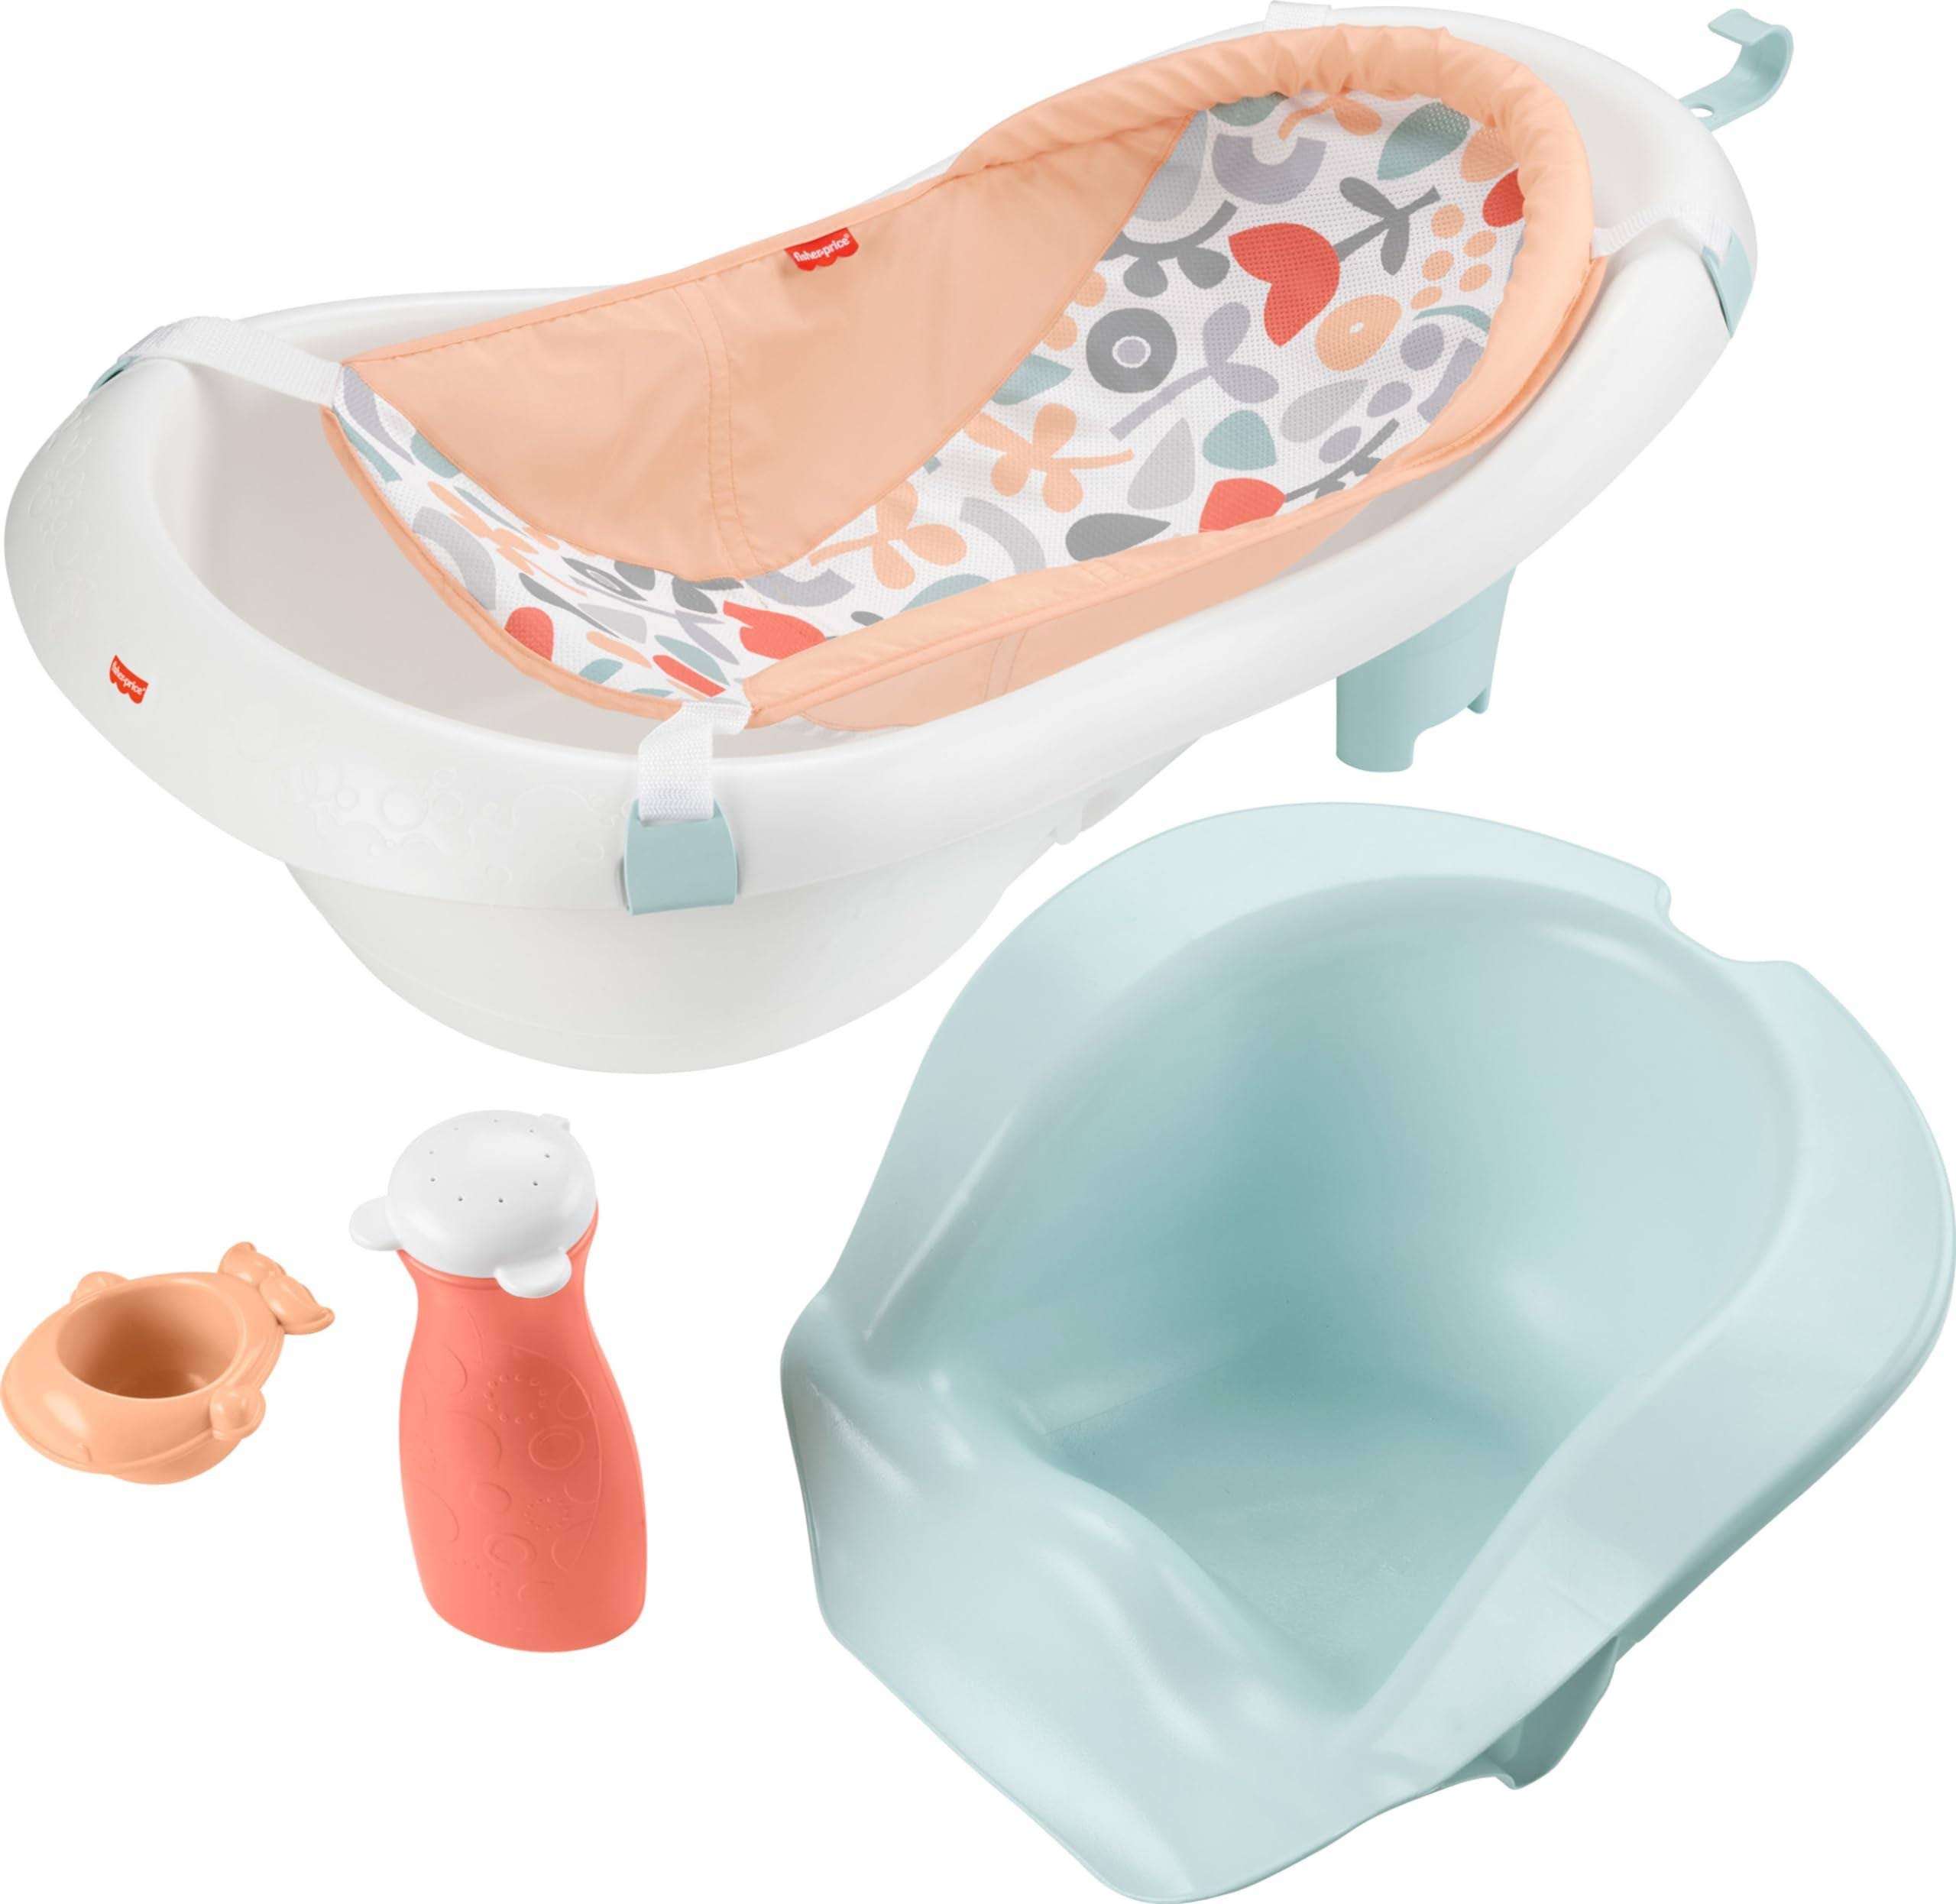 Comforting 4-in-1 Baby Bath for Toddlers and Newborns | Image